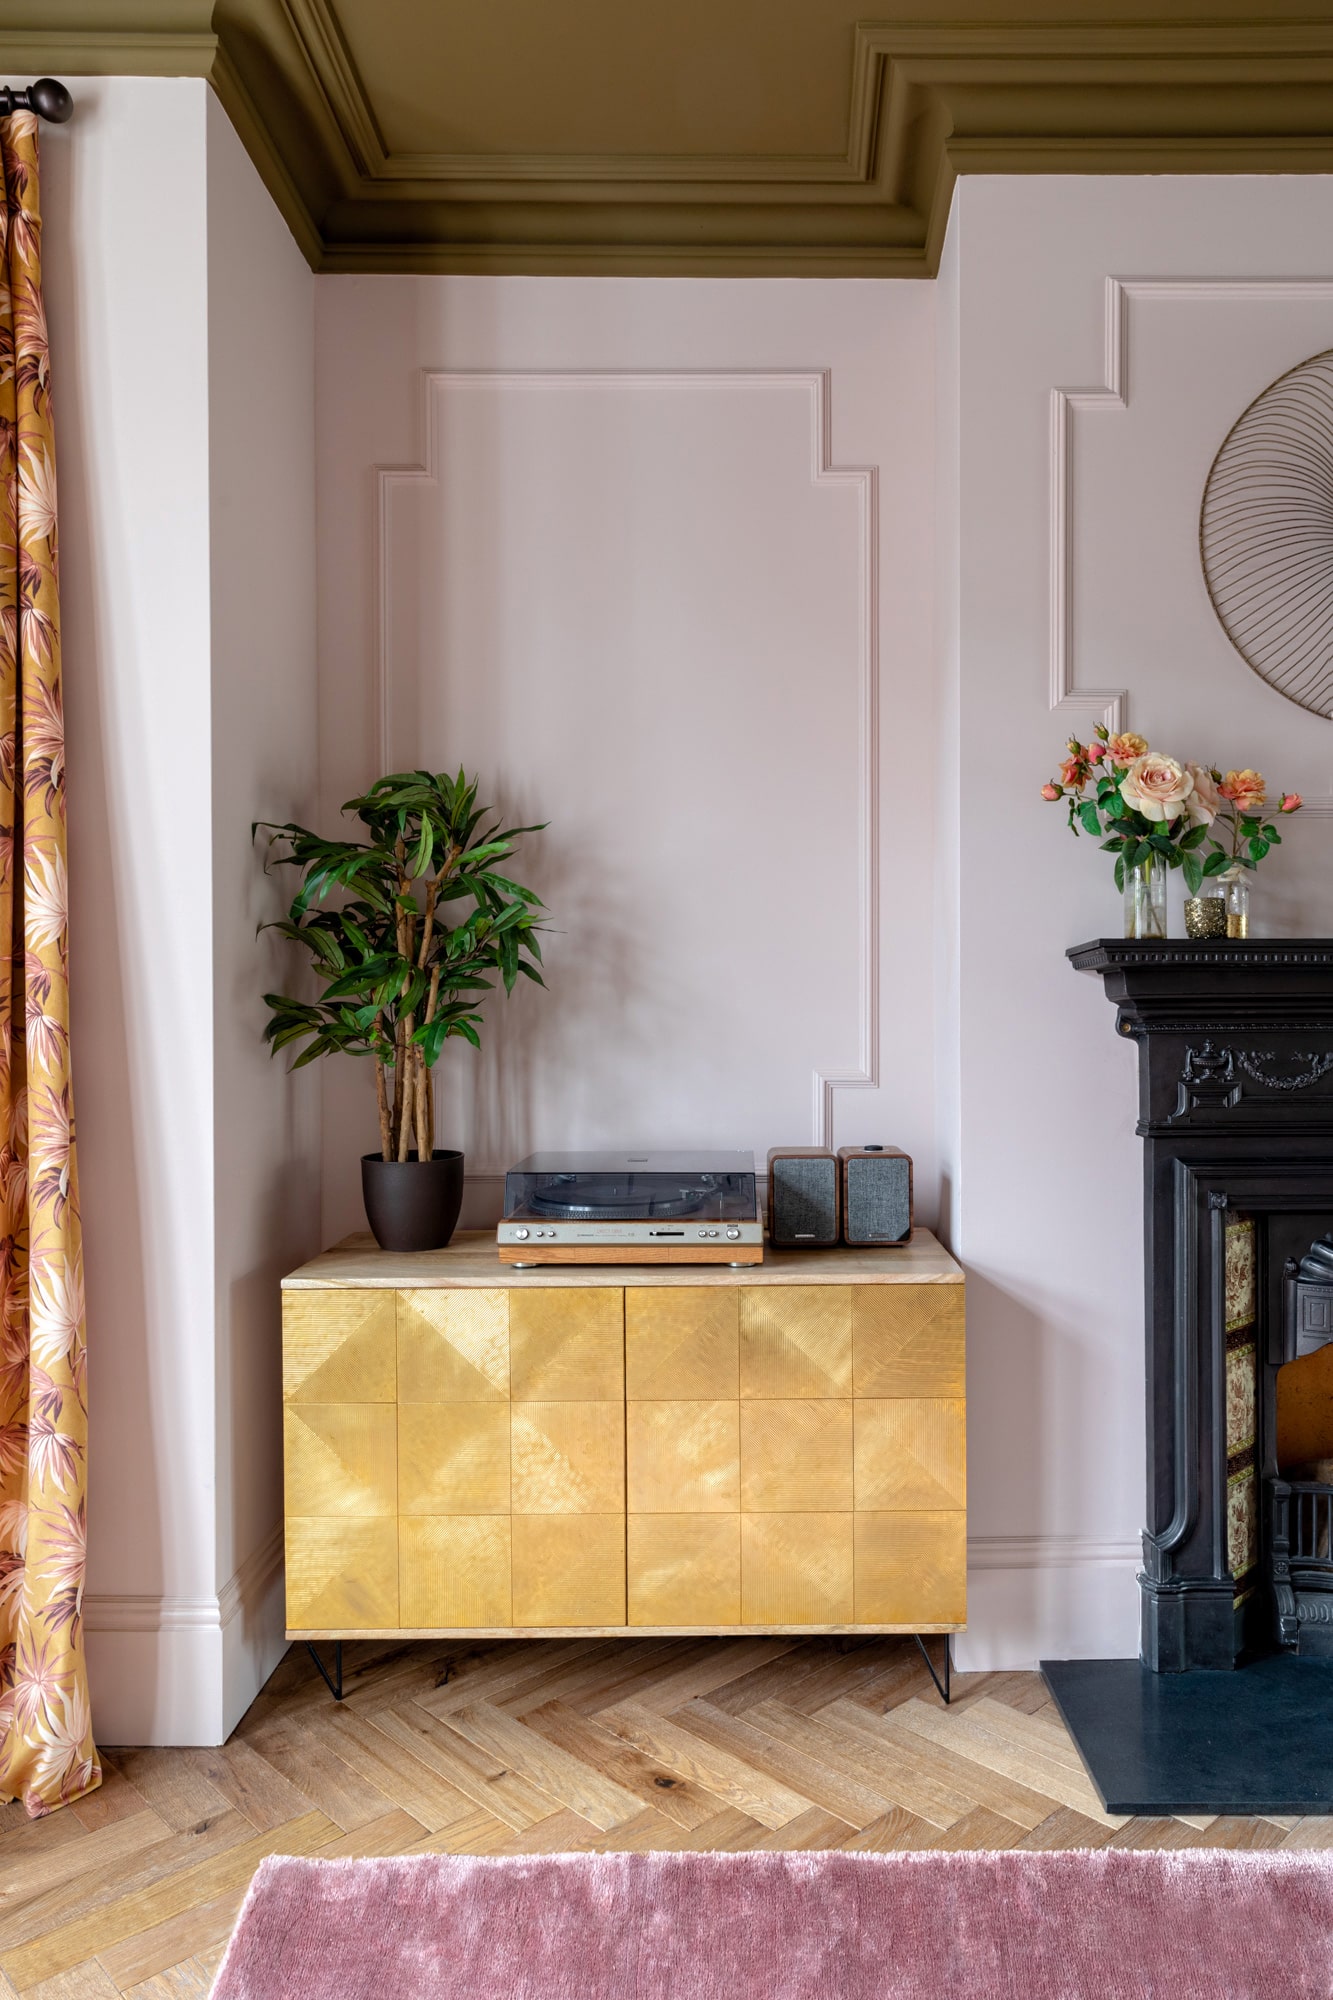 Interior detail shot: golden cabinet and a fireplace